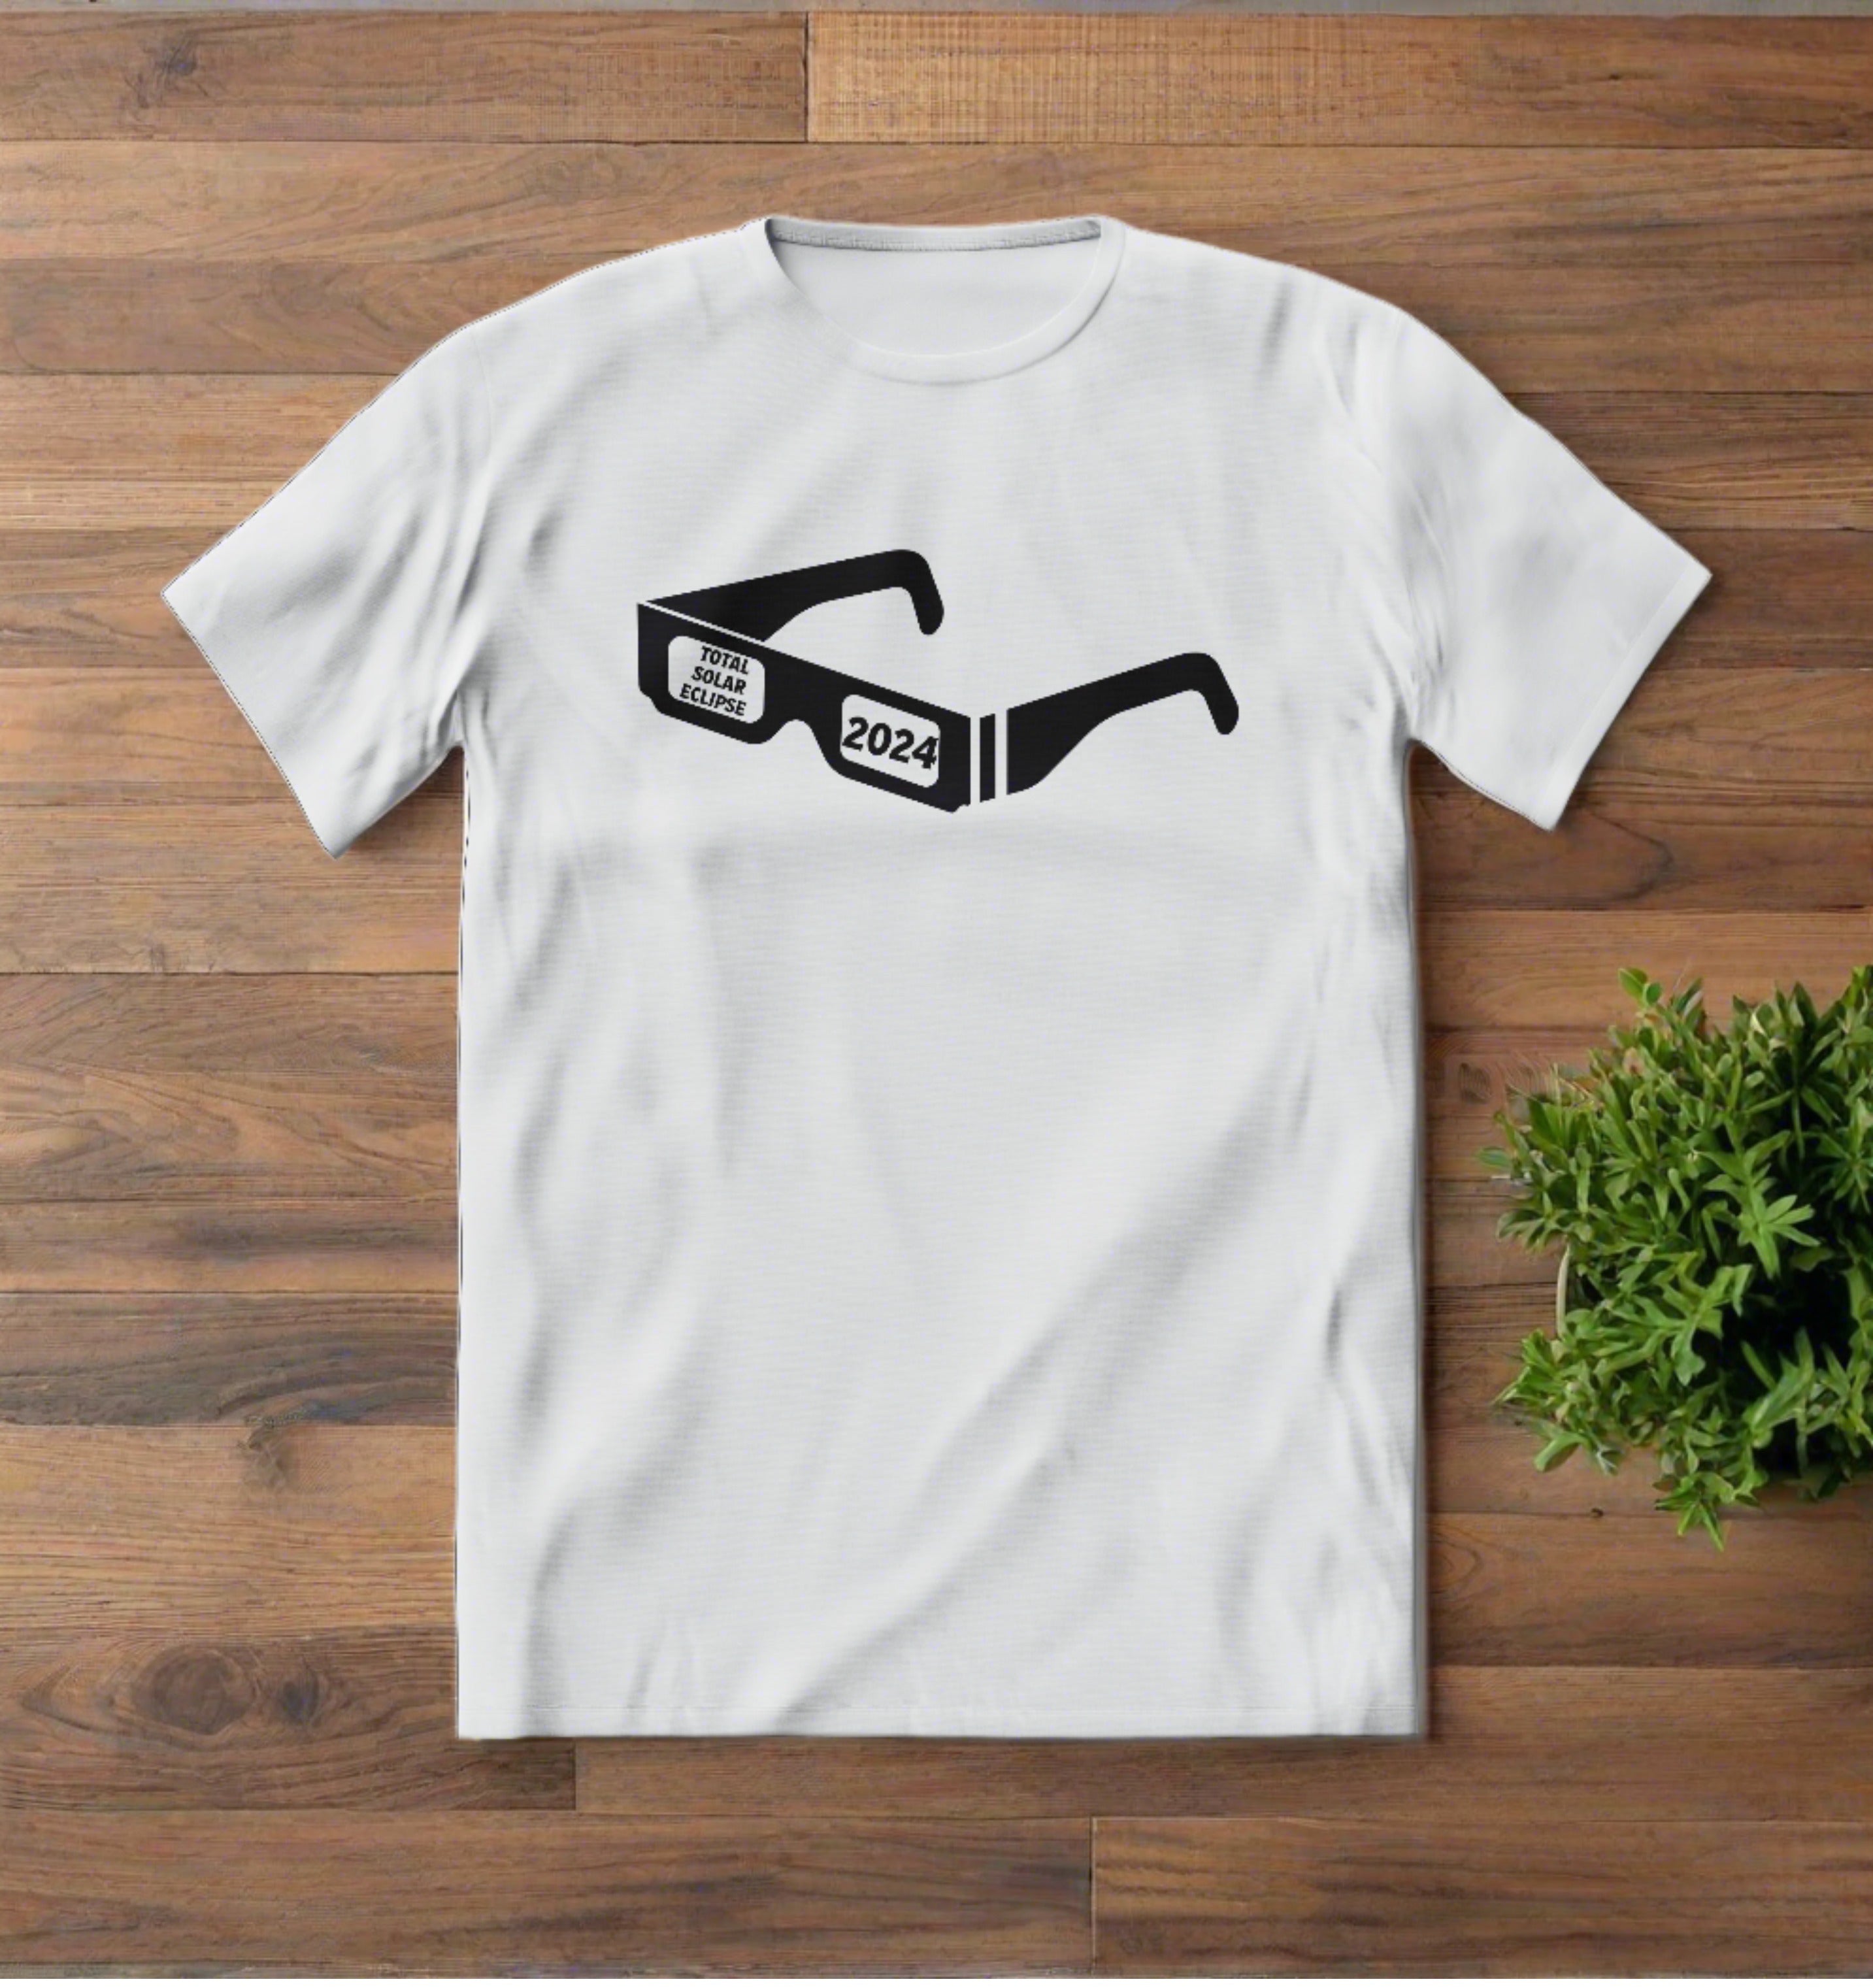 BRIEF INSANITY's Eclipse & Glasses Short Sleeve T-Shirt